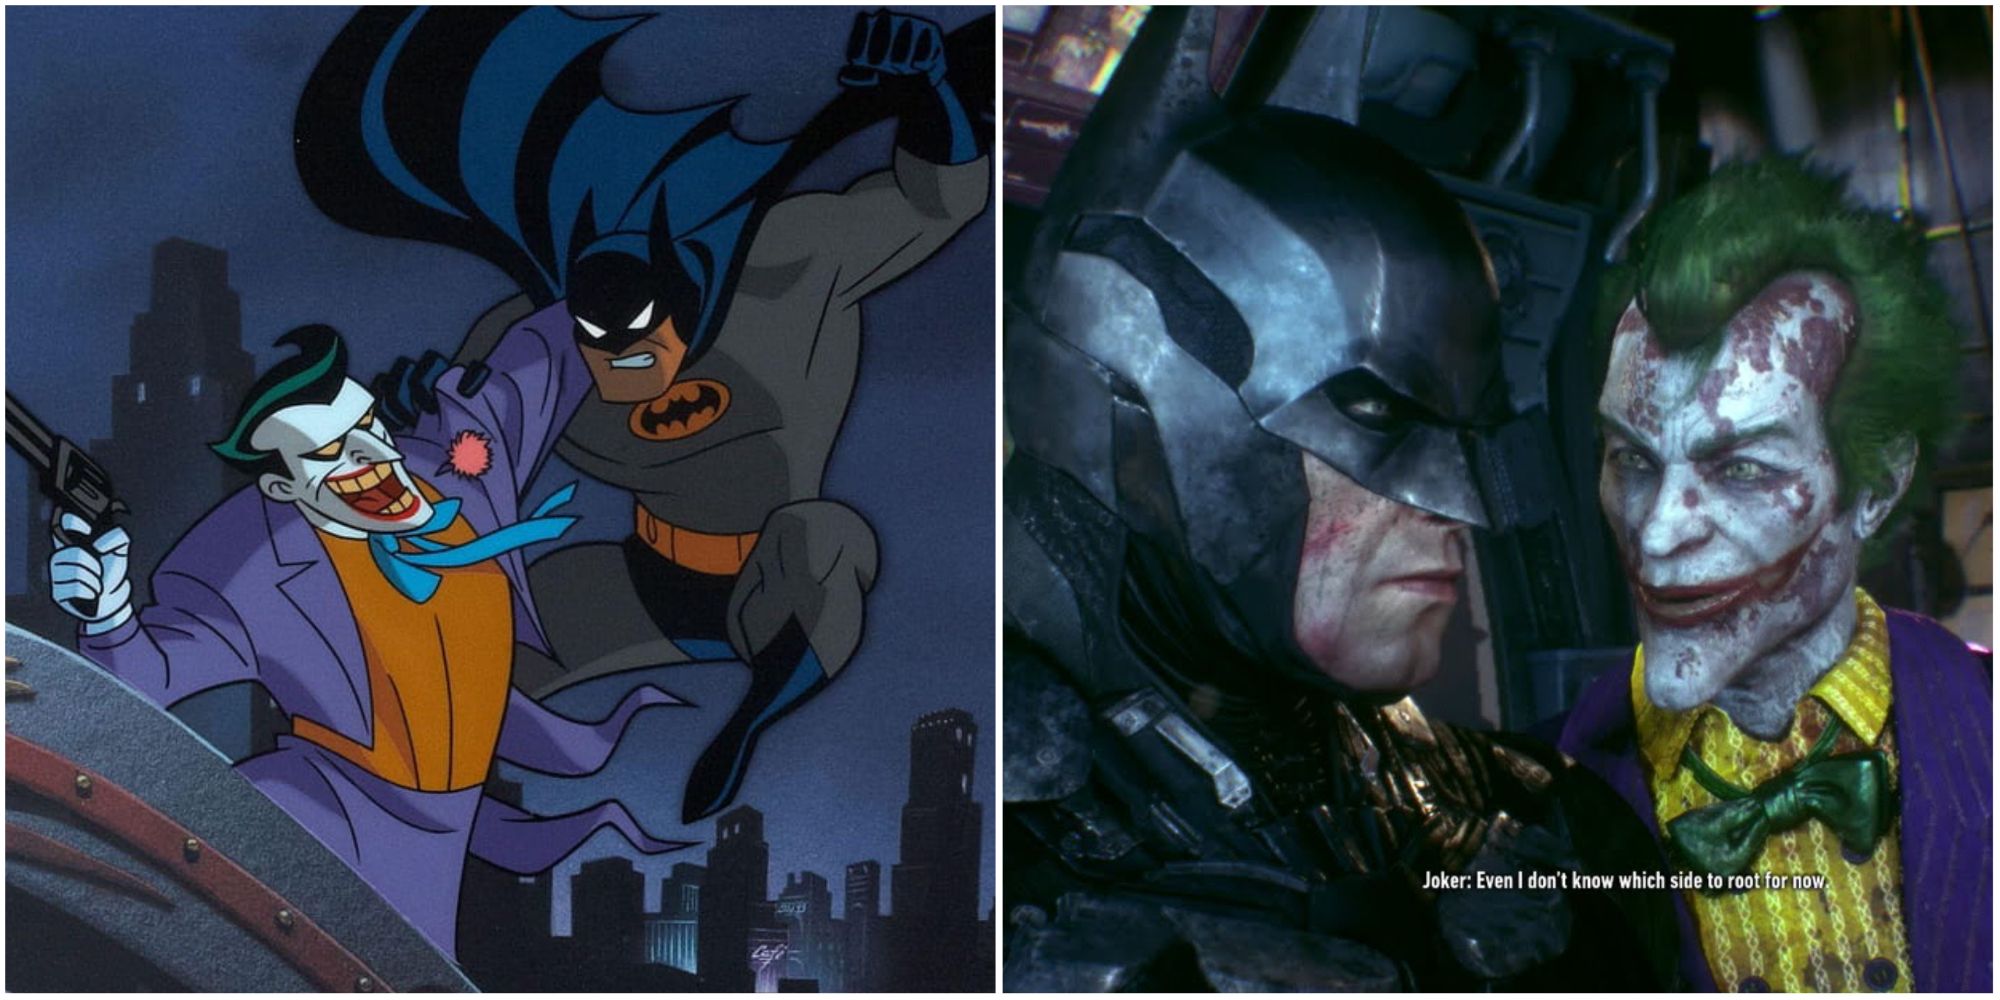 Batman and the Joker in The Animated Series and Arkham Knight